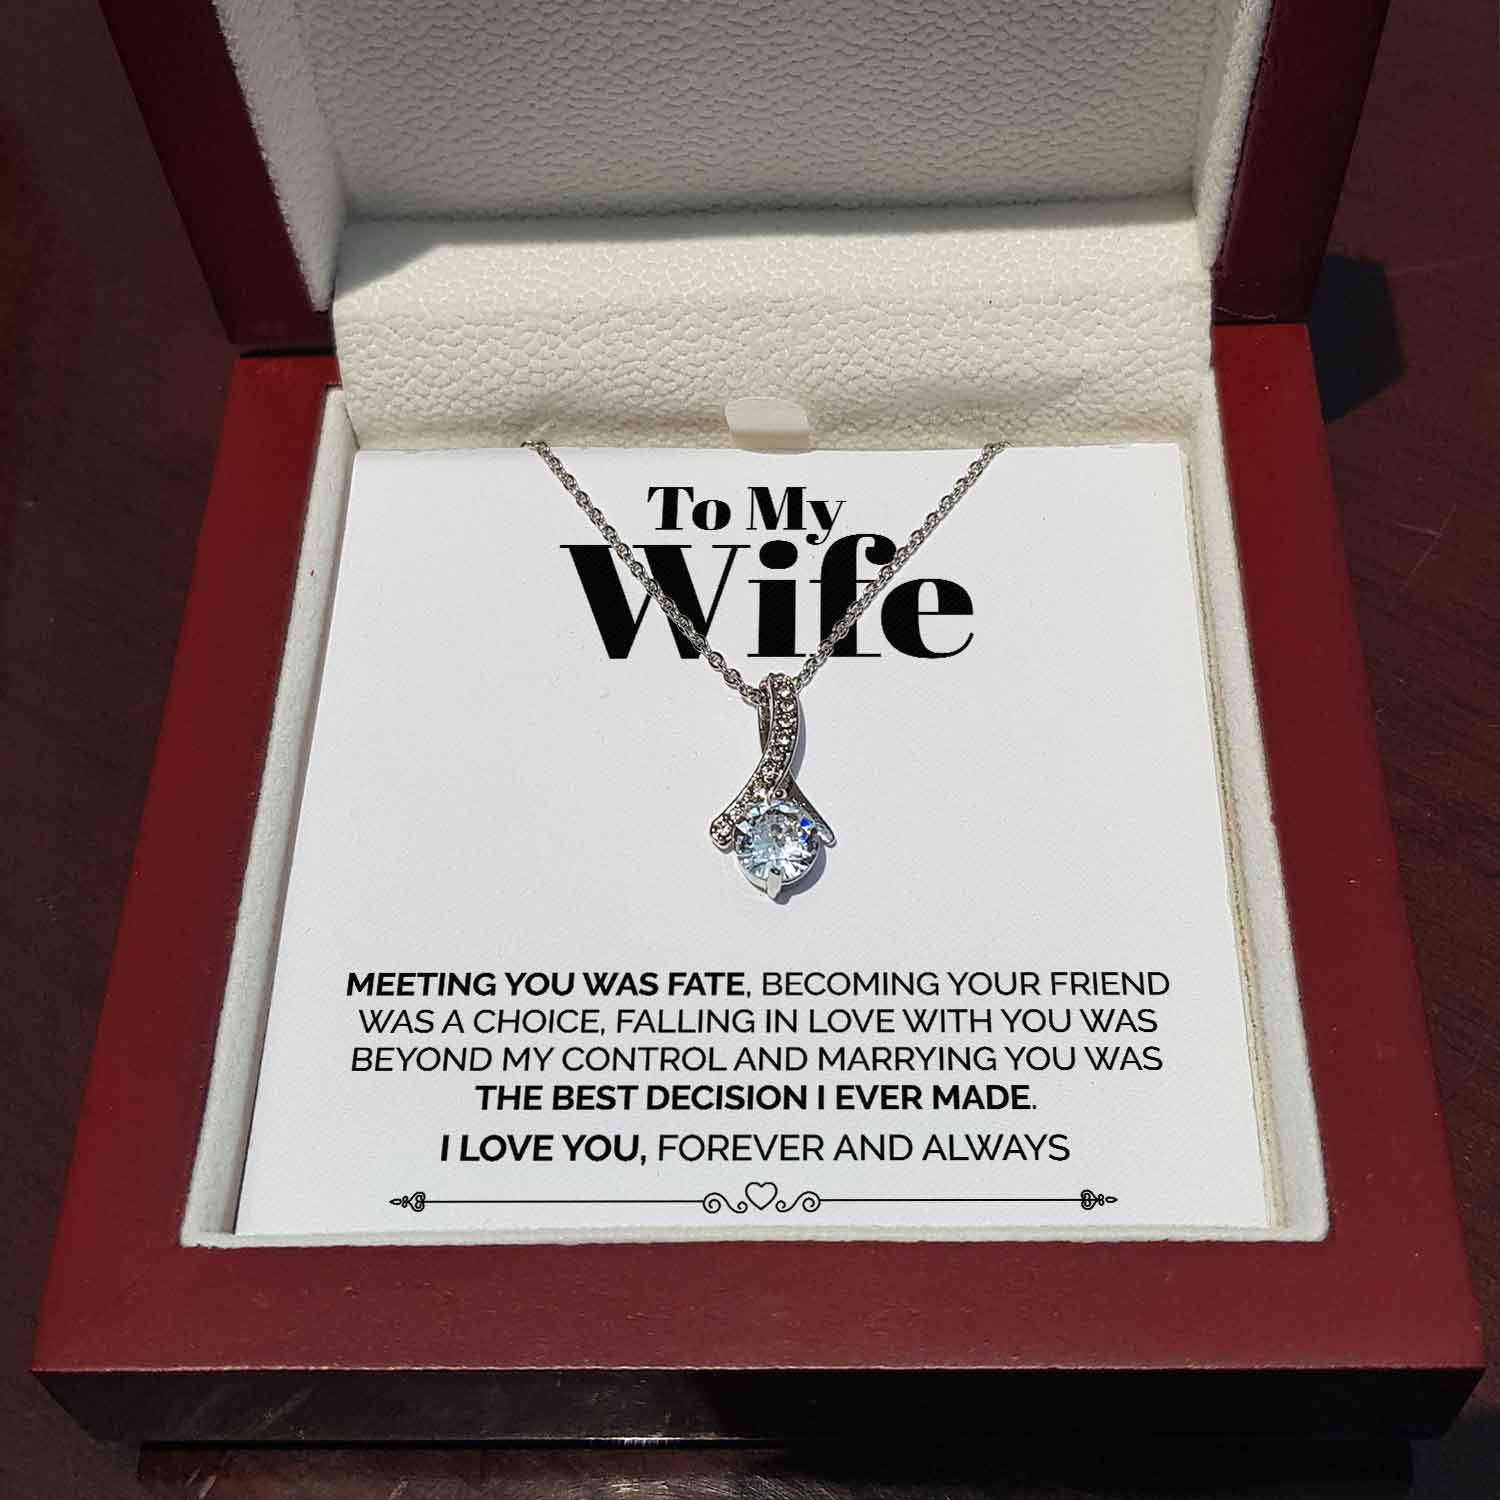 ShineOn Fulfillment Jewelry Standard Box To My Wife - Meeting You Was Fate - Ribbon Necklace